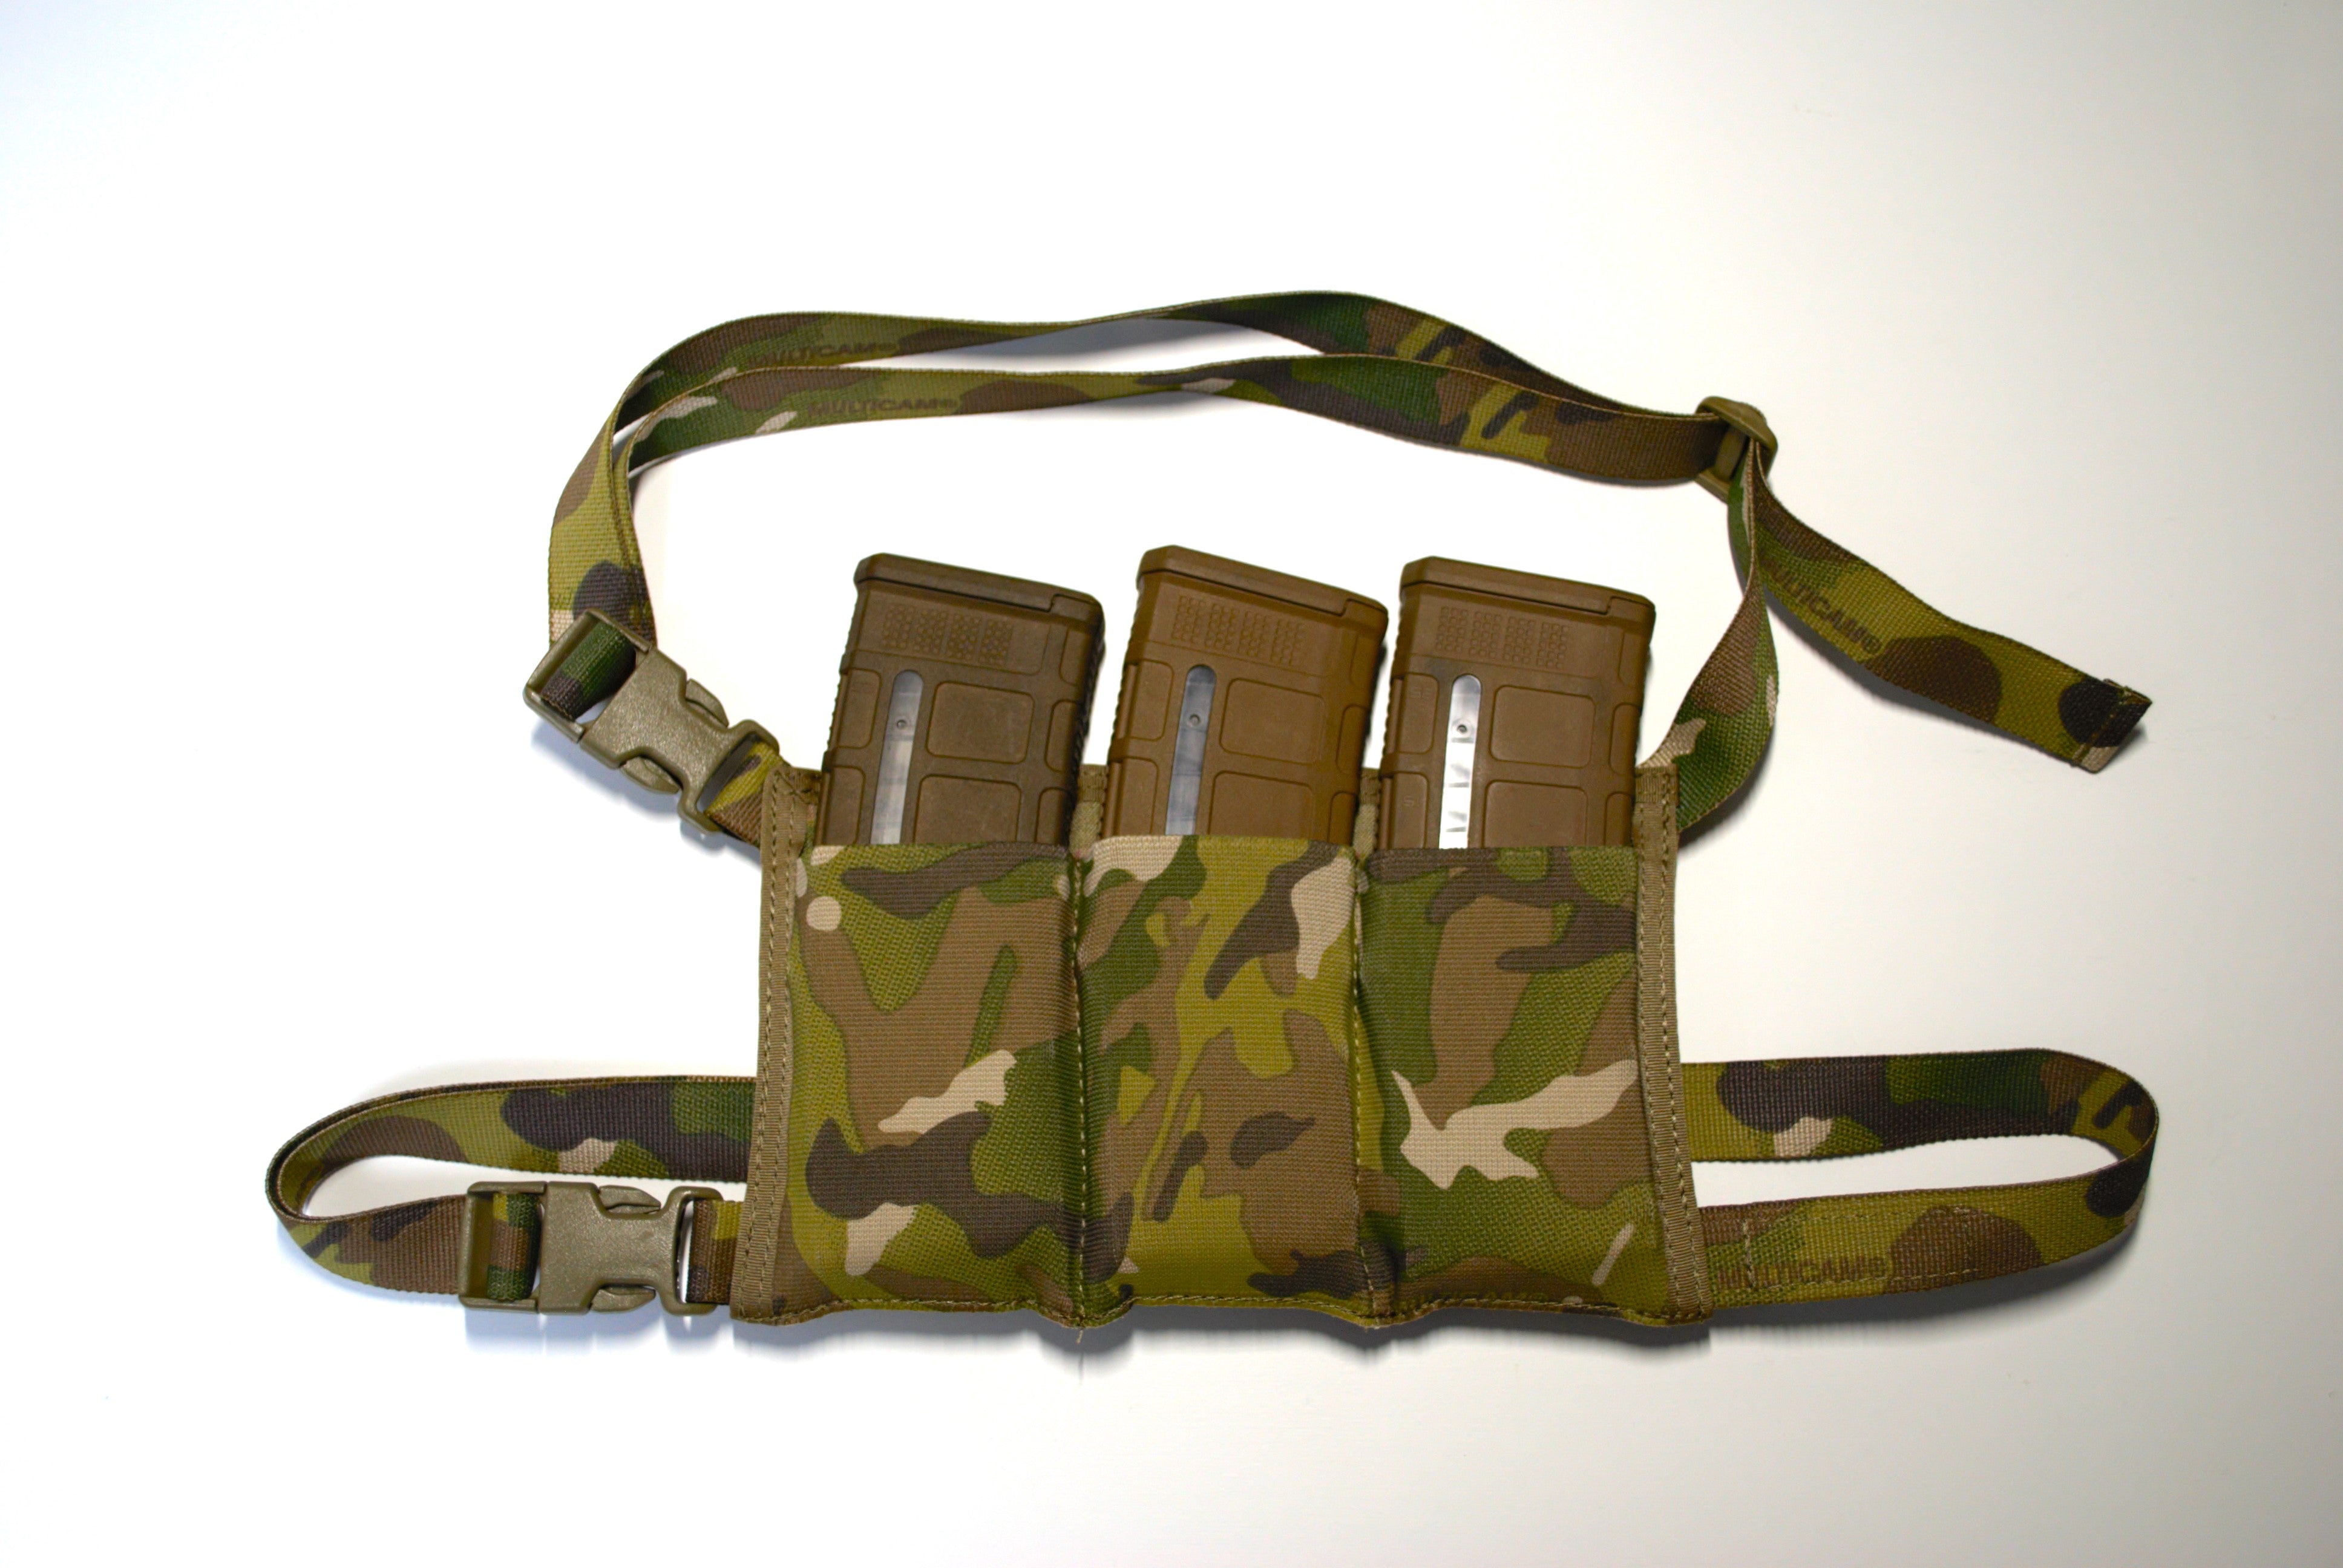 Chest-Rig, Belt Kit（チェストリグ、弾帯装具） – Stagehand Tactical